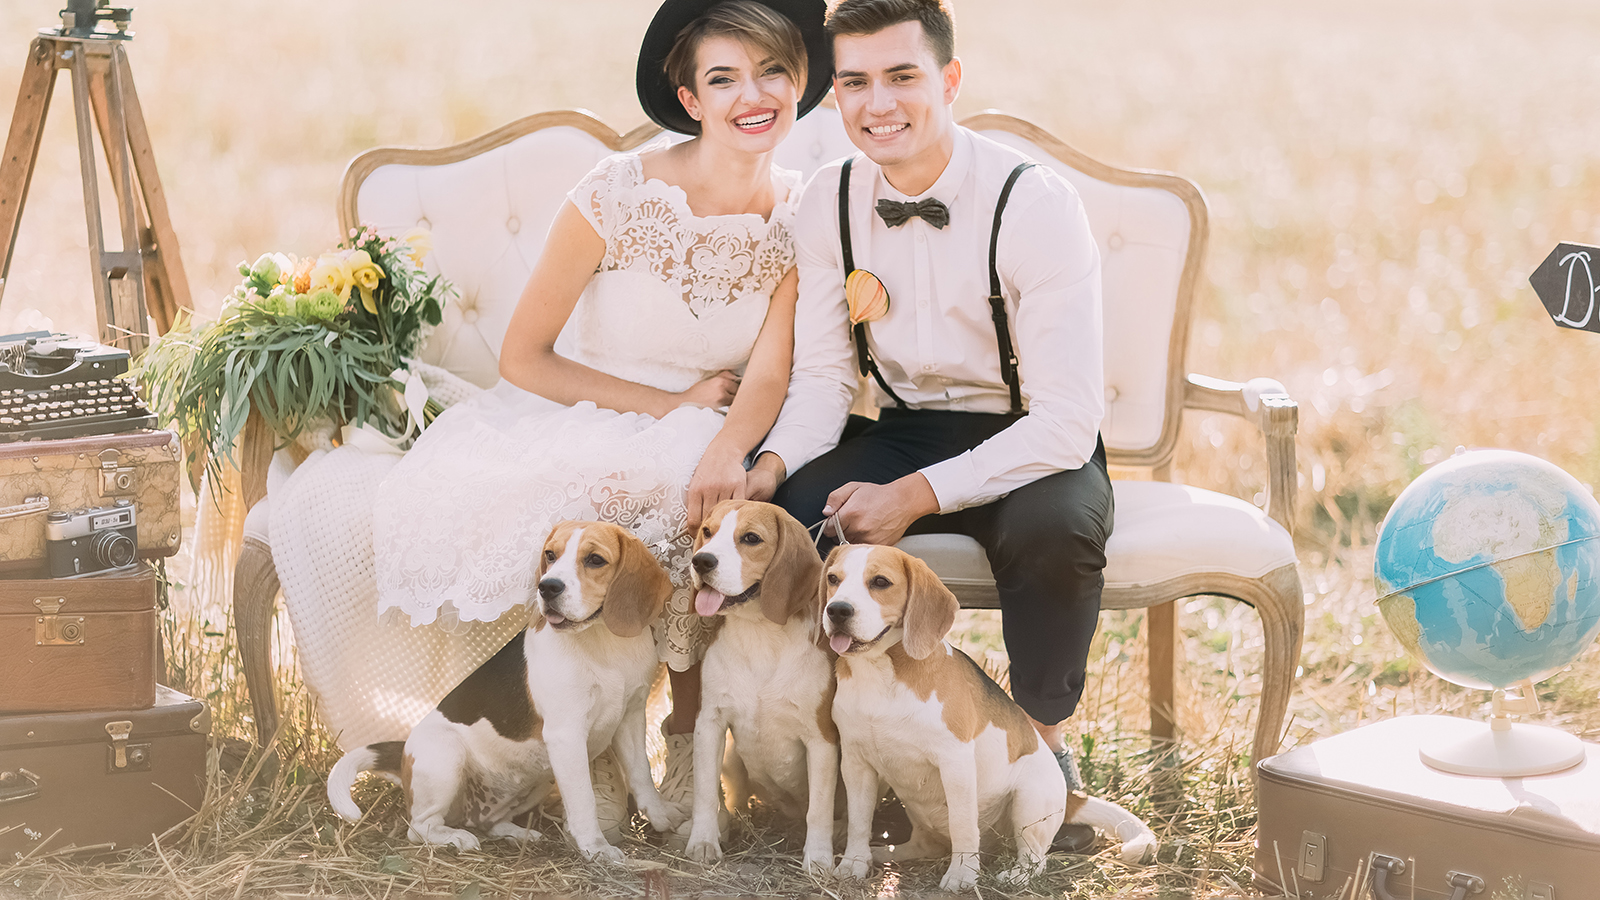 Happy newlyweds are sitting with the three little dogs on the old-fashioned sofa surrouned by the vintage suitcases, flowers and globe. The sunny field composition